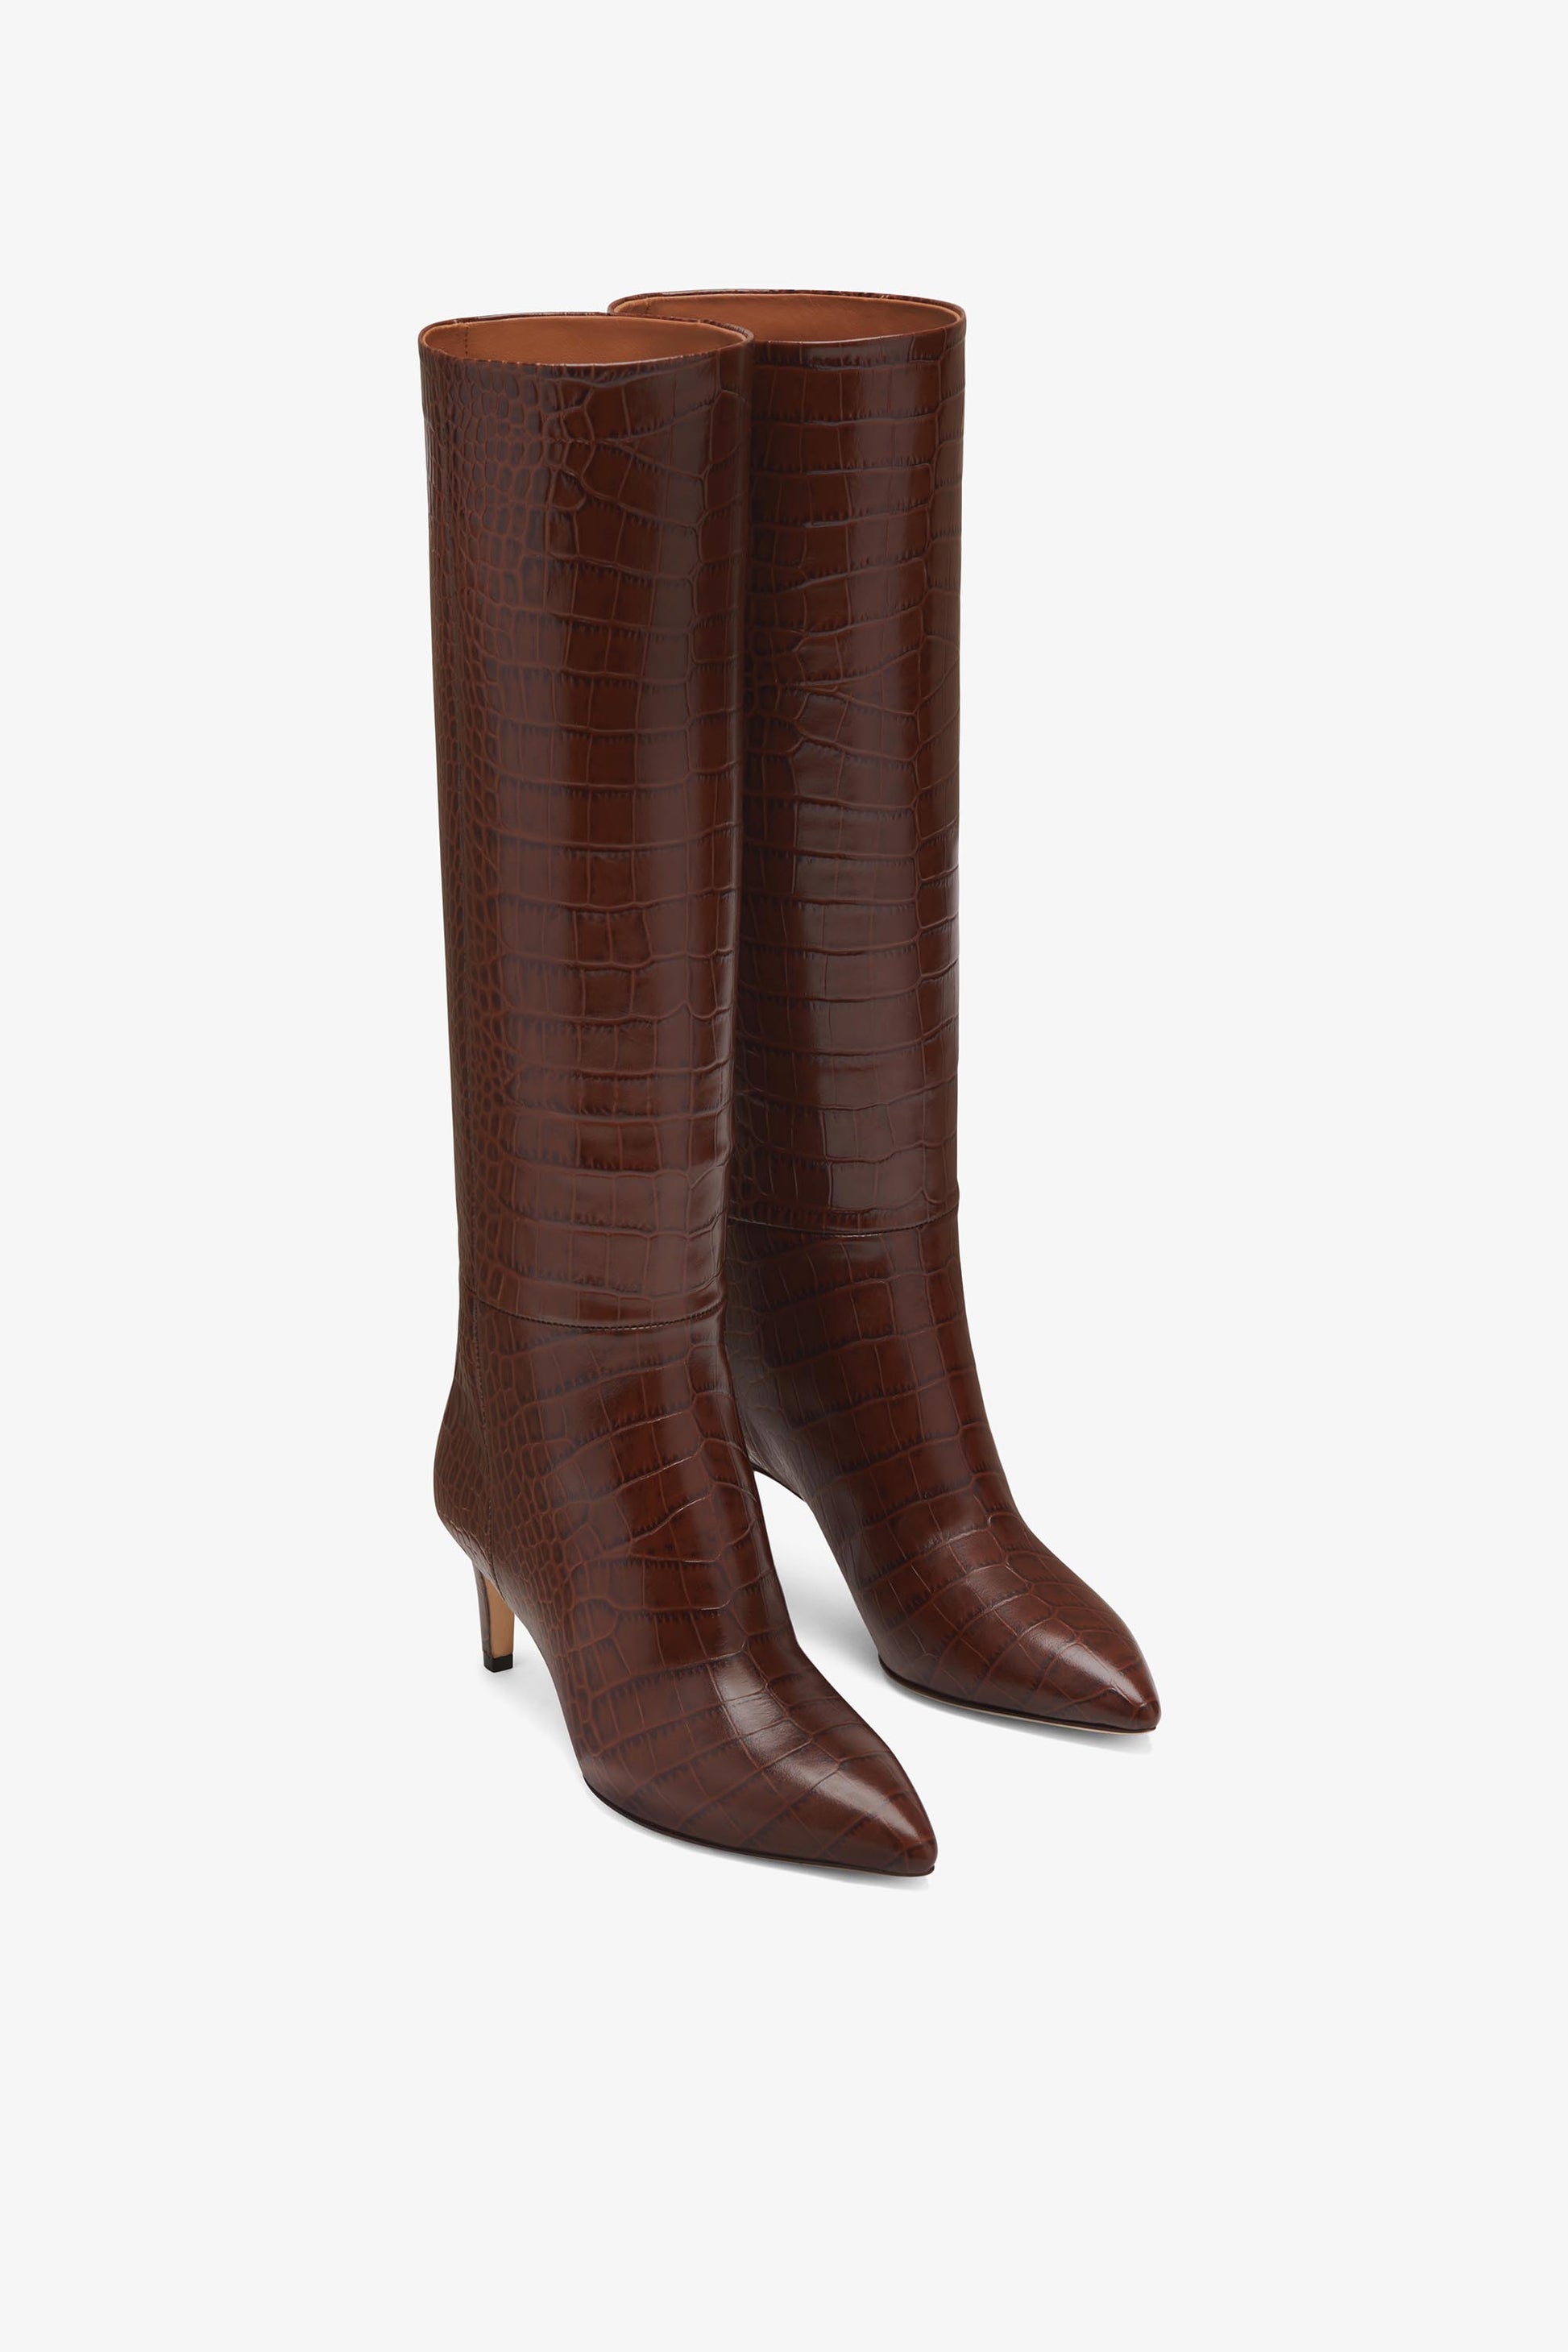 Chocolate brown croc-effect leather heel 60 boots